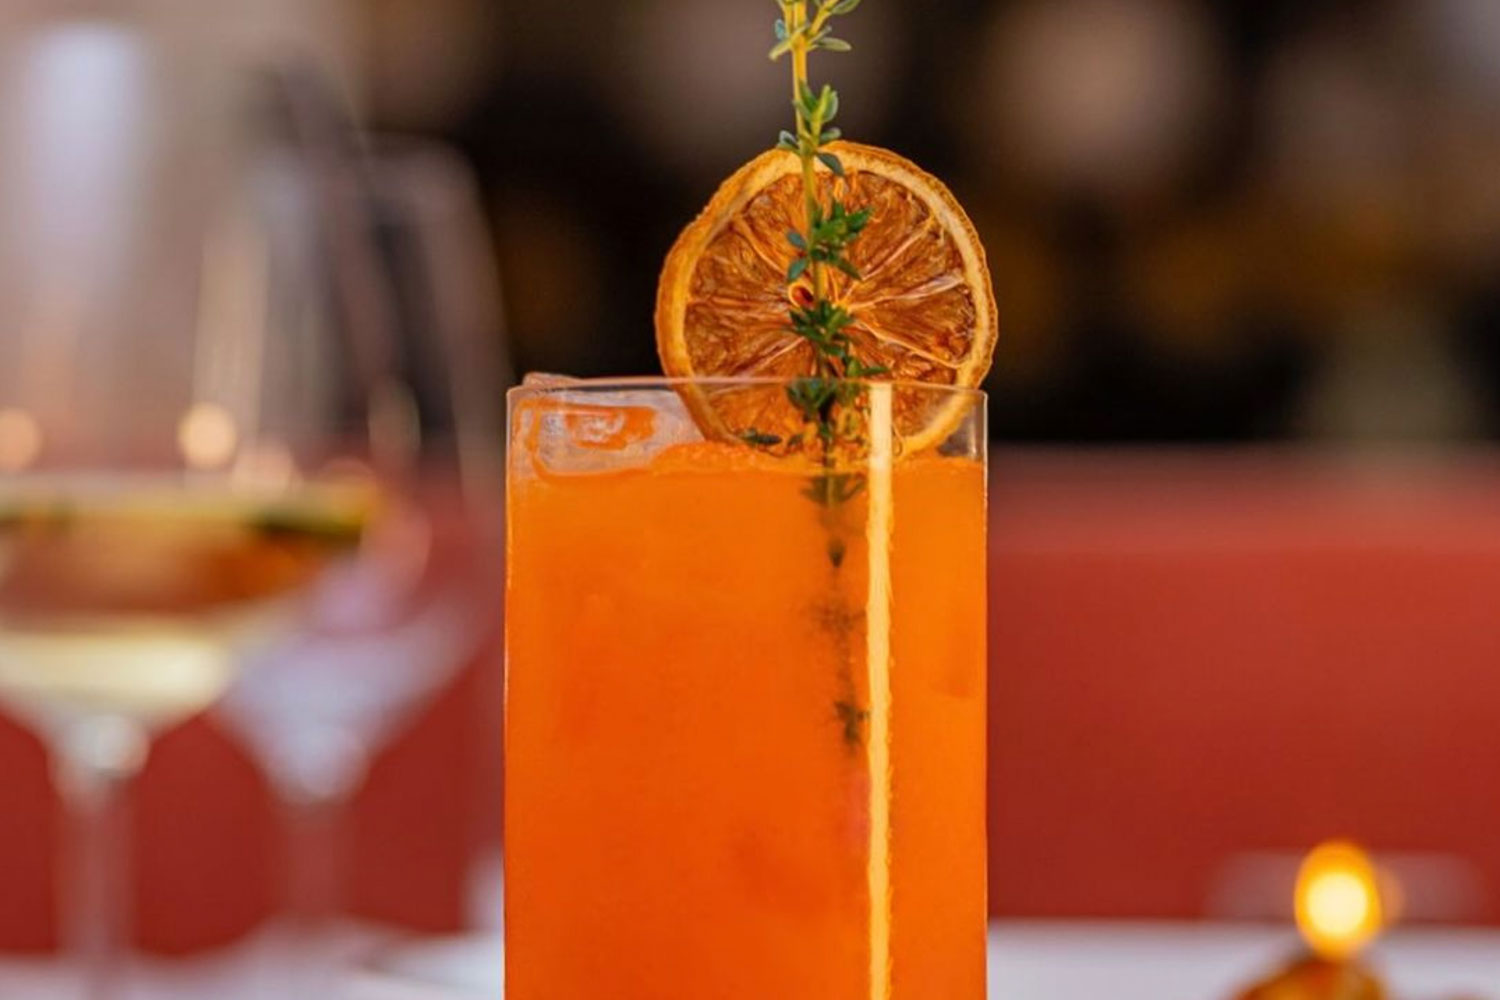 Orange drink in a highball glass with a s prig of thyme and a dehydrated orange for garnish